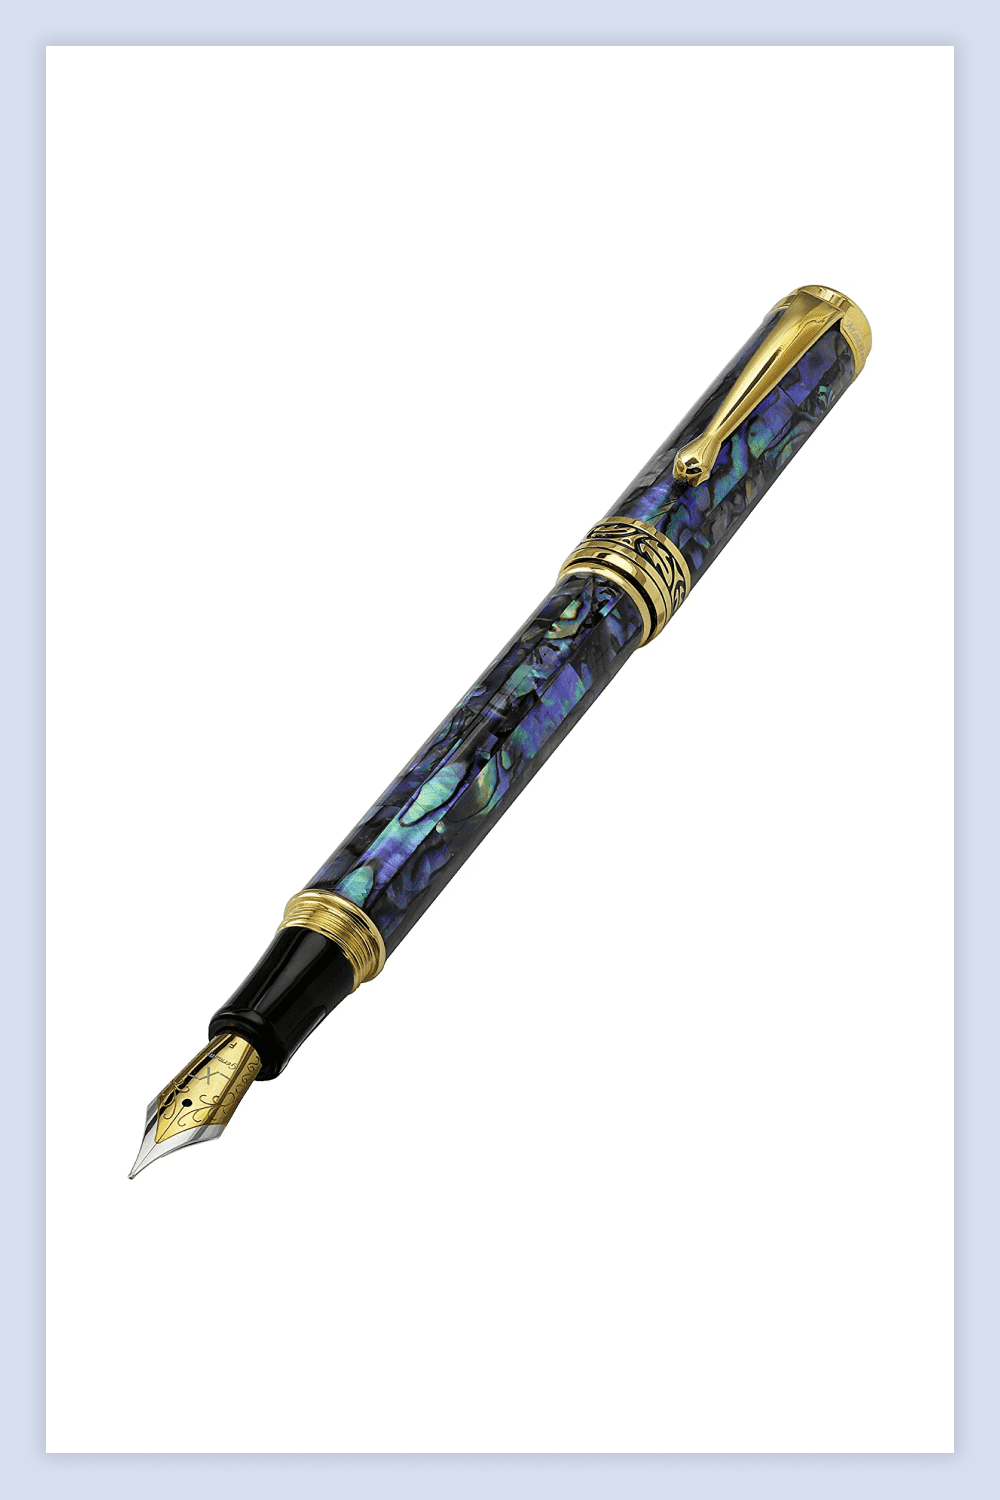 Photo of the Xezo Maestro Natural Sea Shell Handmade Fountain Pen with 18K Gold Plated Parts.